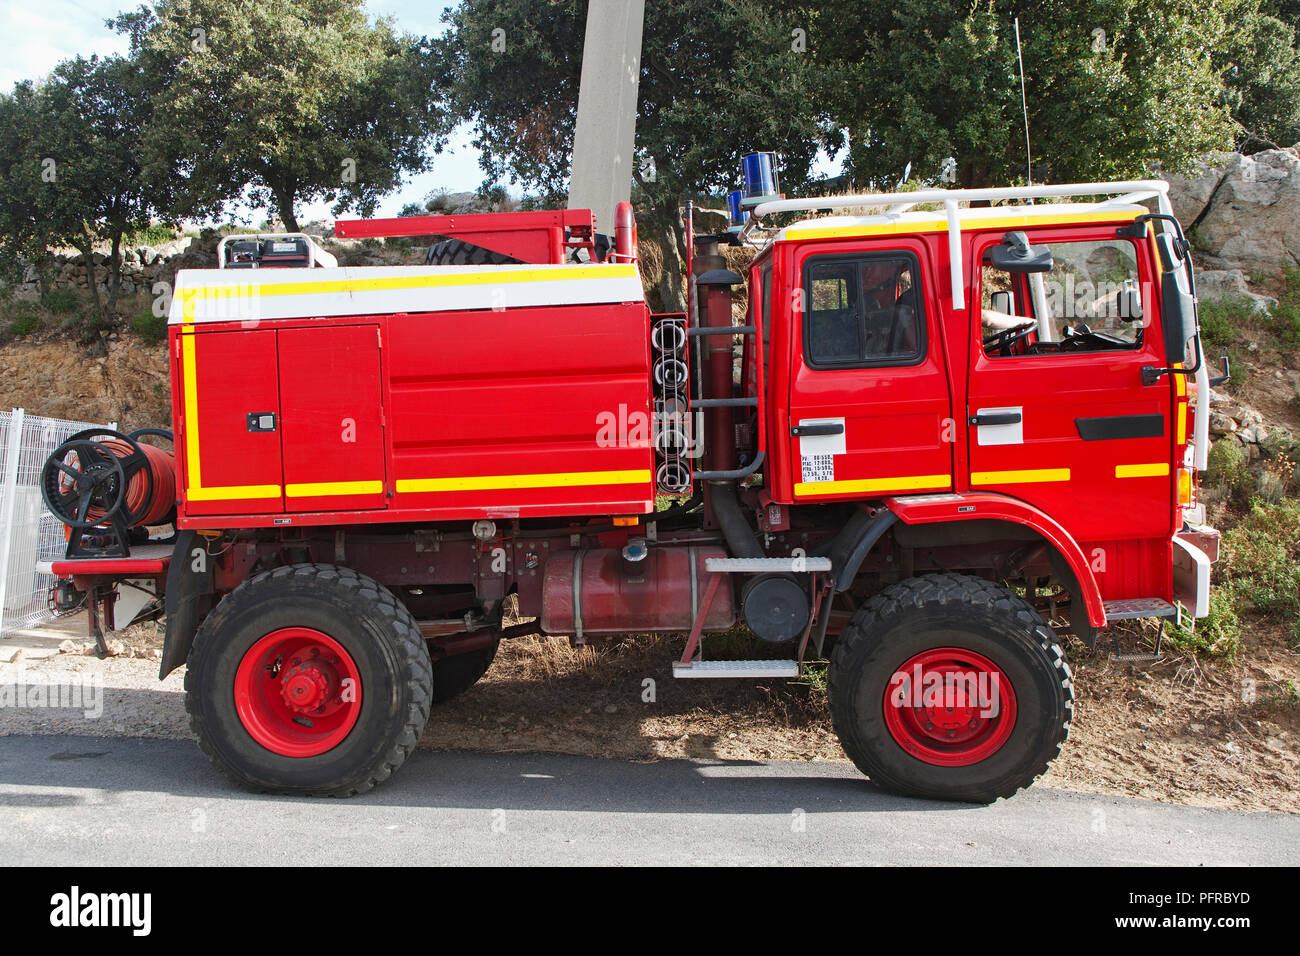 Corsica, red fire engine parked at side of road on island Stock Photo